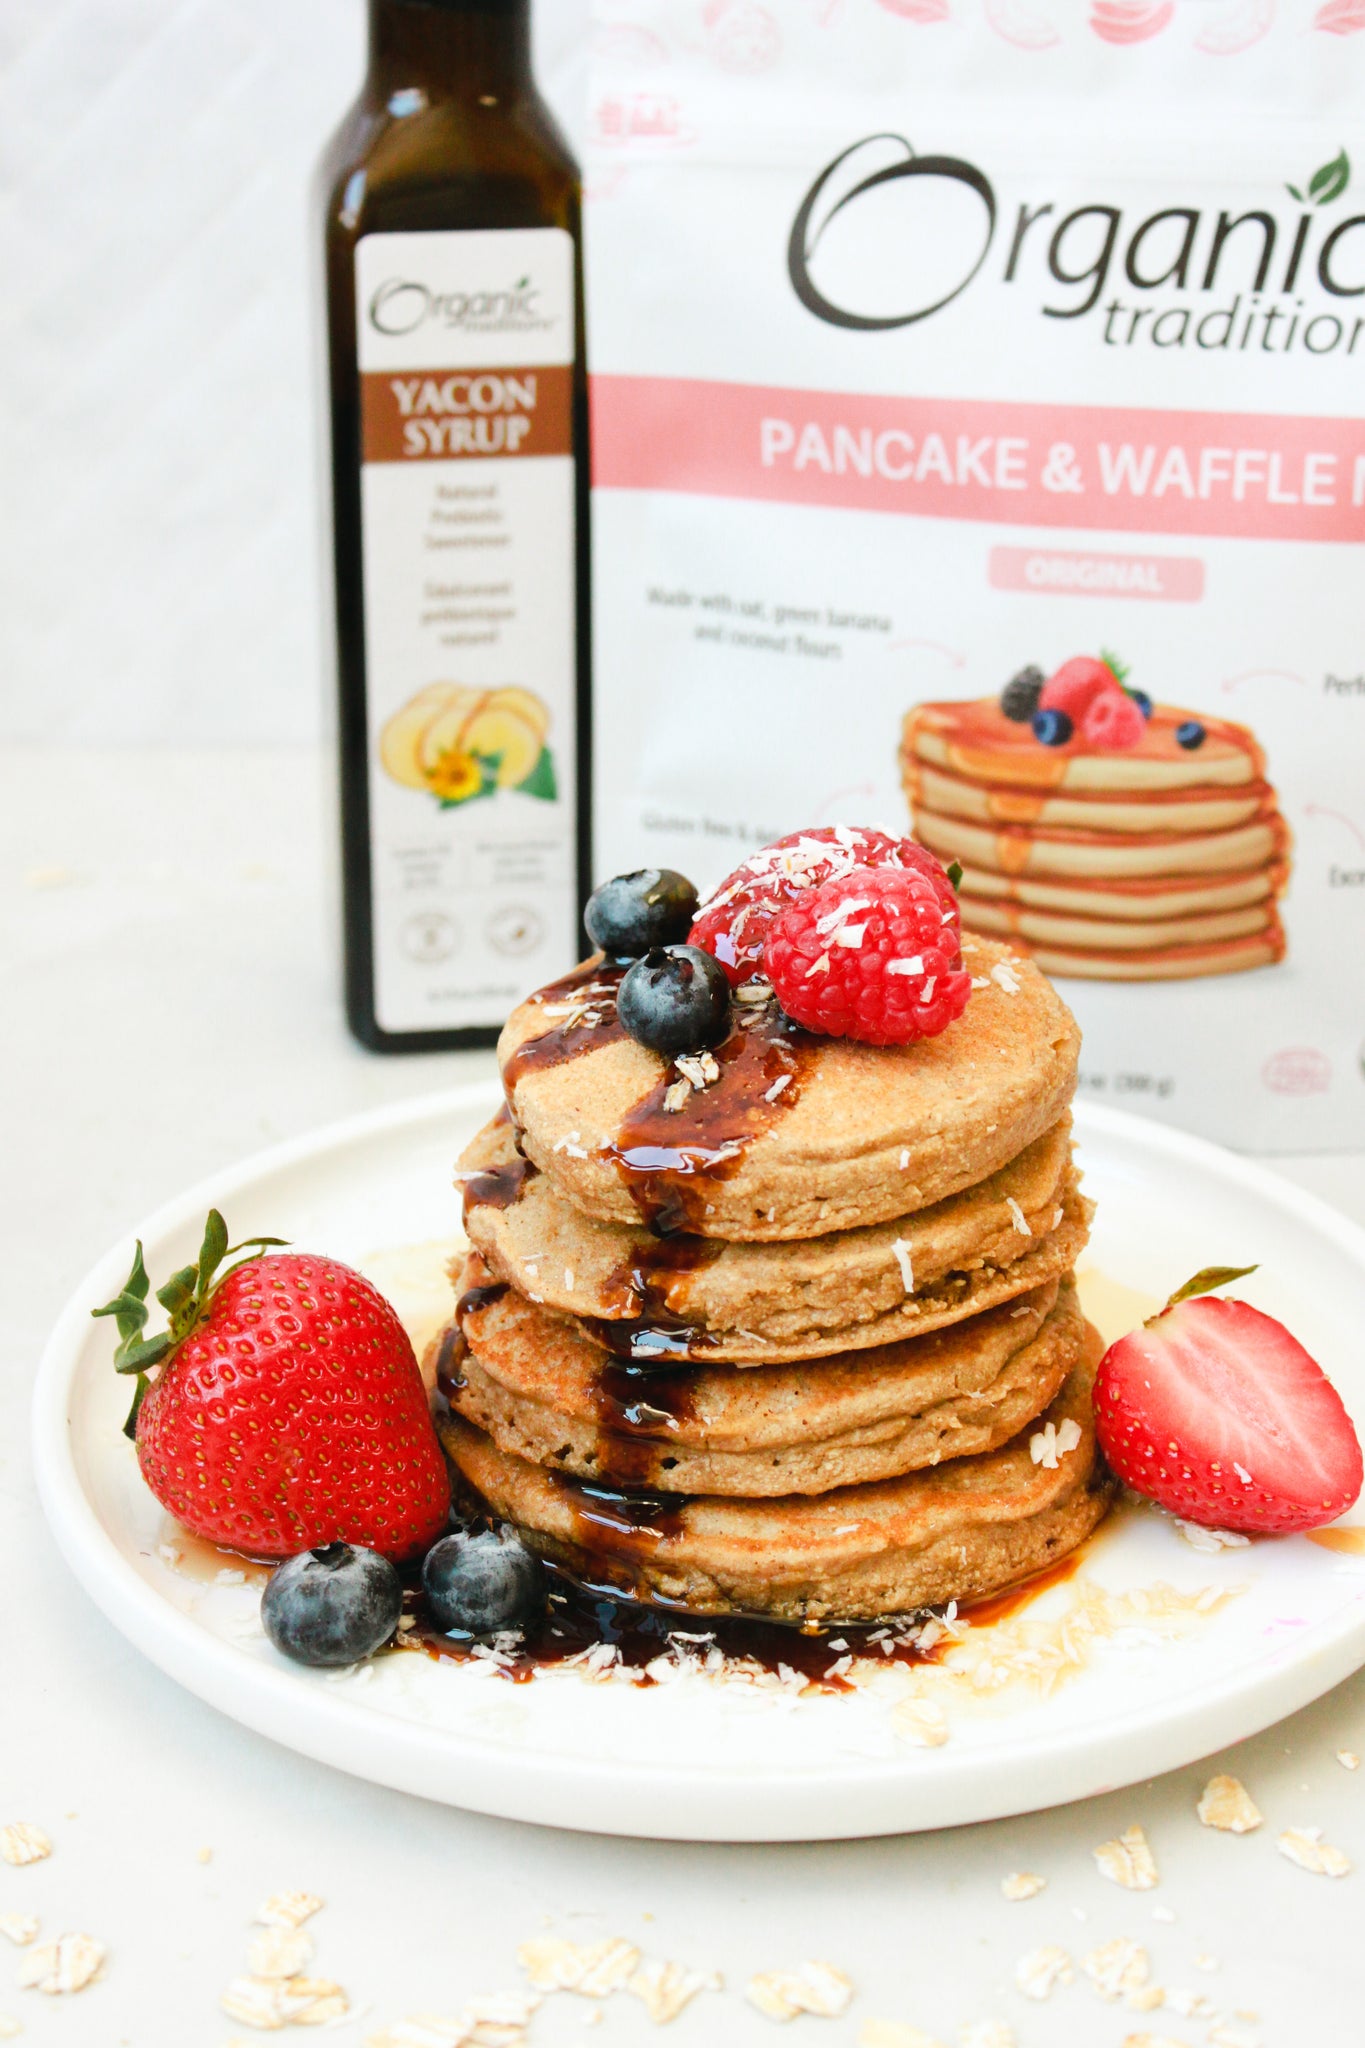 organic traditions original pancakes with yacon syrup drizzle